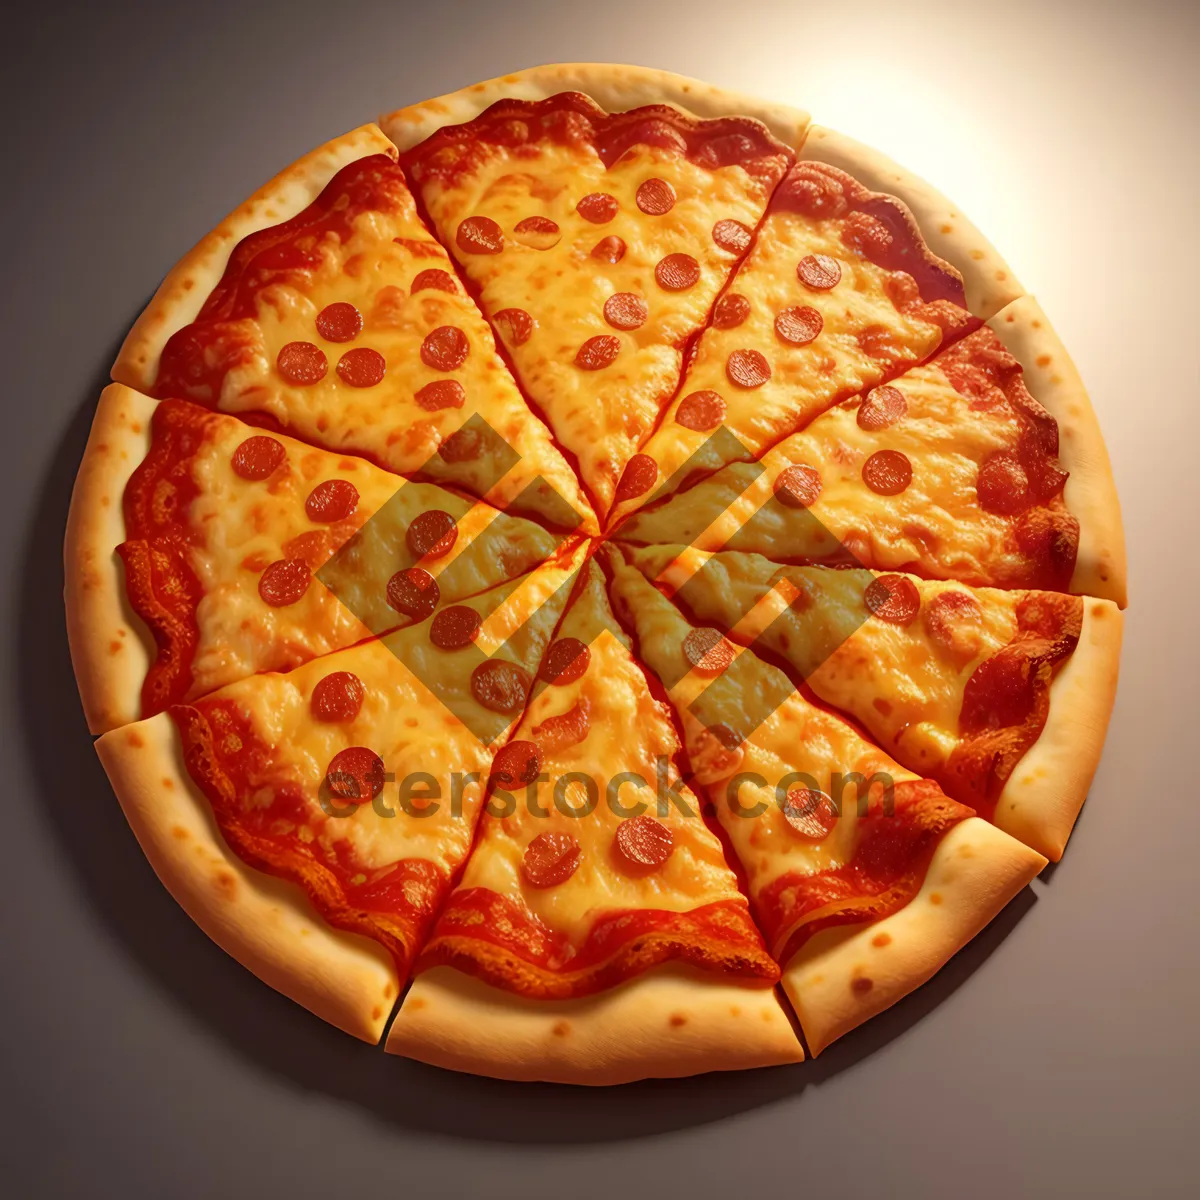 Picture of Delicious Gourmet Pizza Slice: Tasty and Nutritious Meal